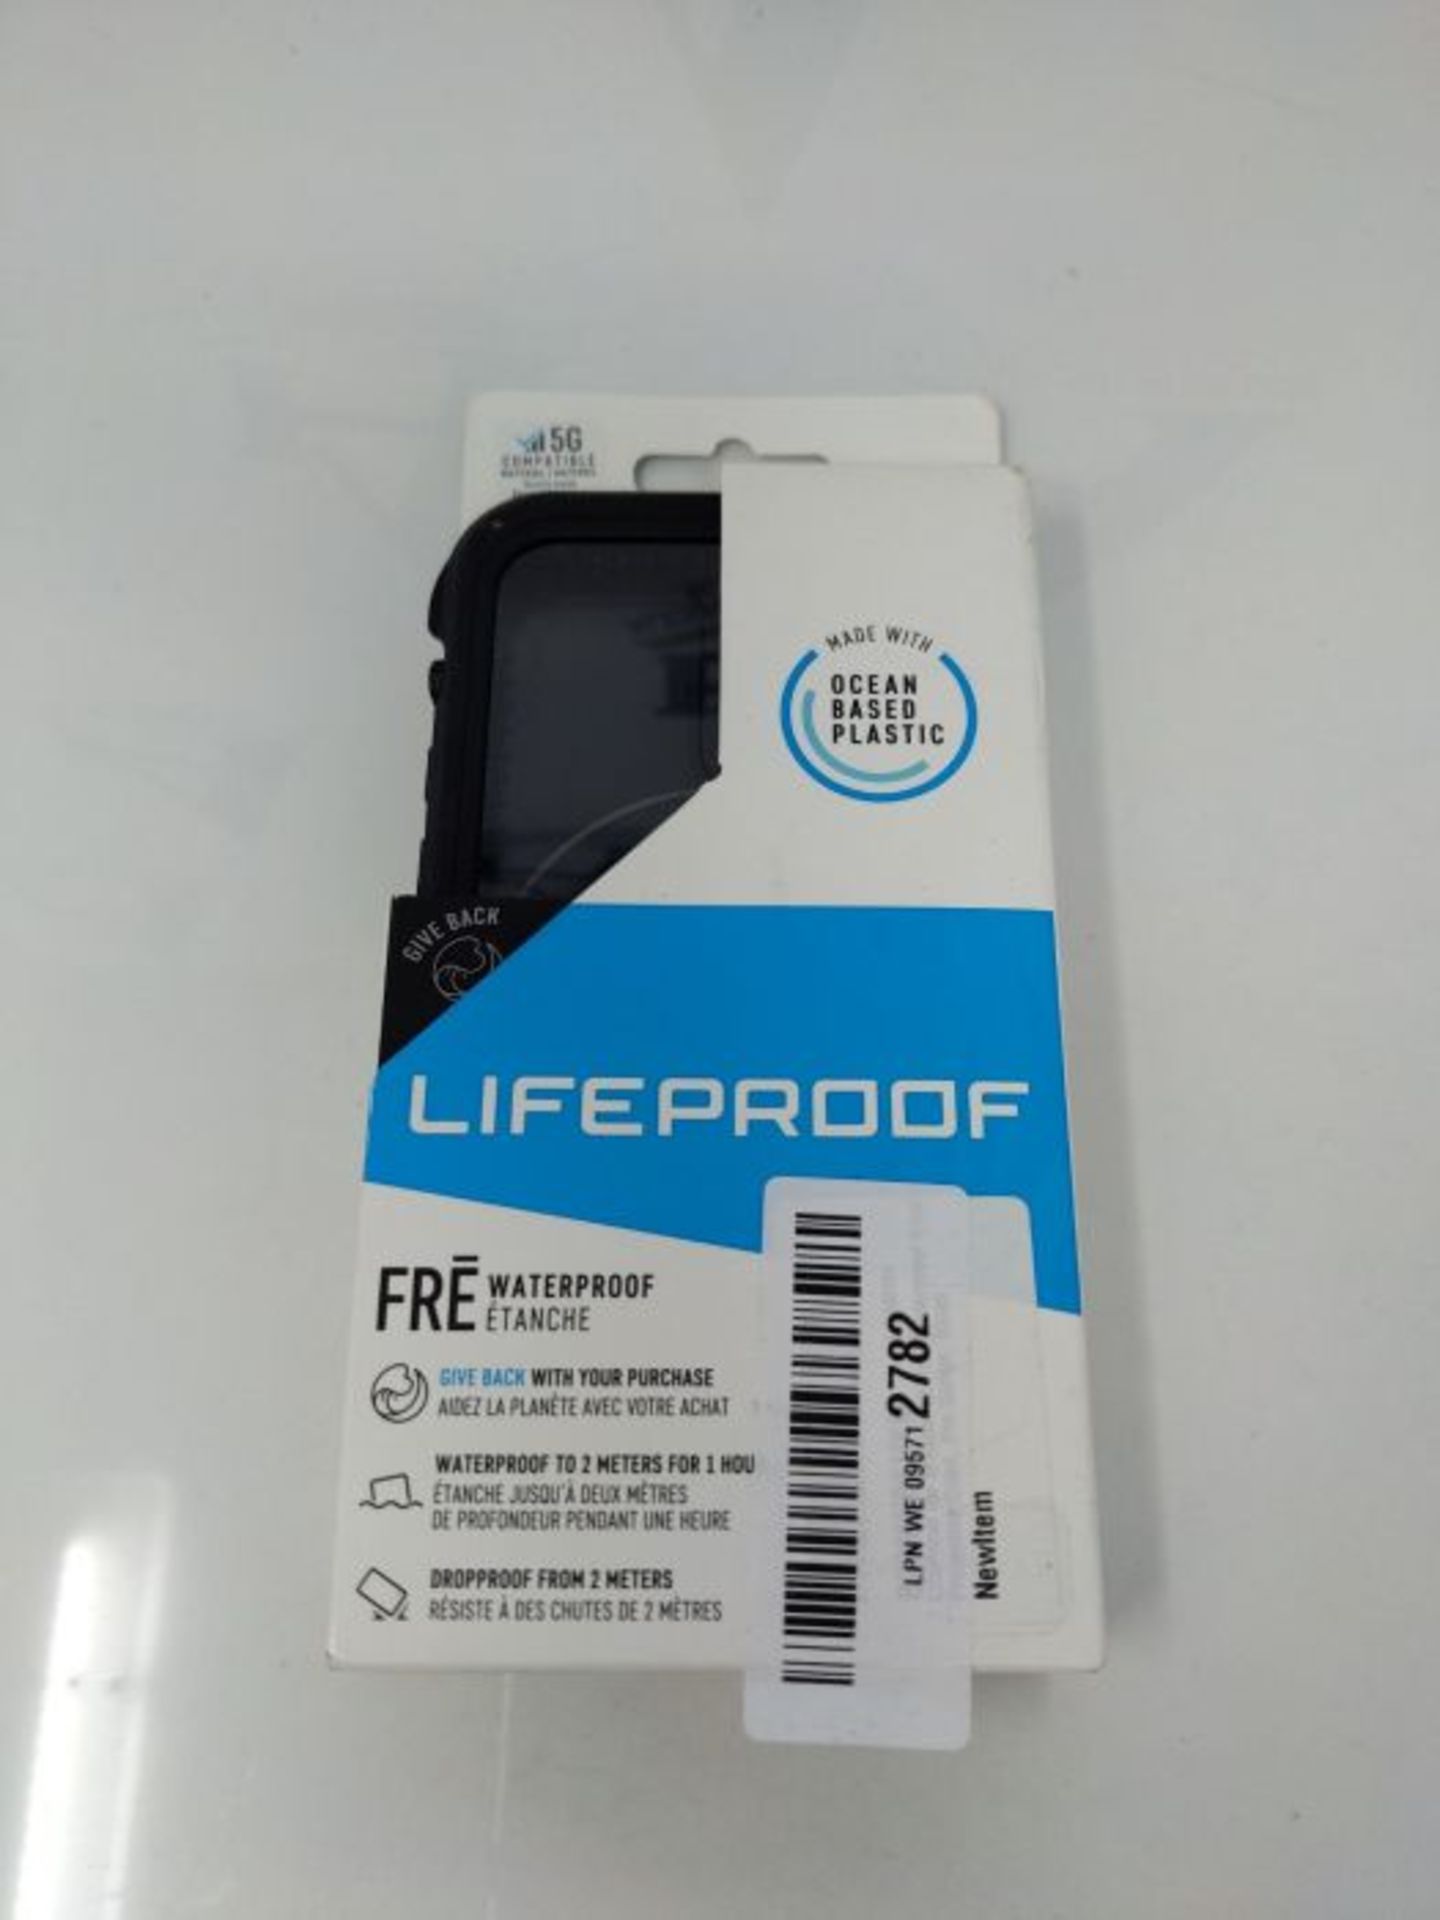 LifeProof for iPhone 12 Pro, Waterproof Drop Protective Case, Fre Series, Black - Image 2 of 9